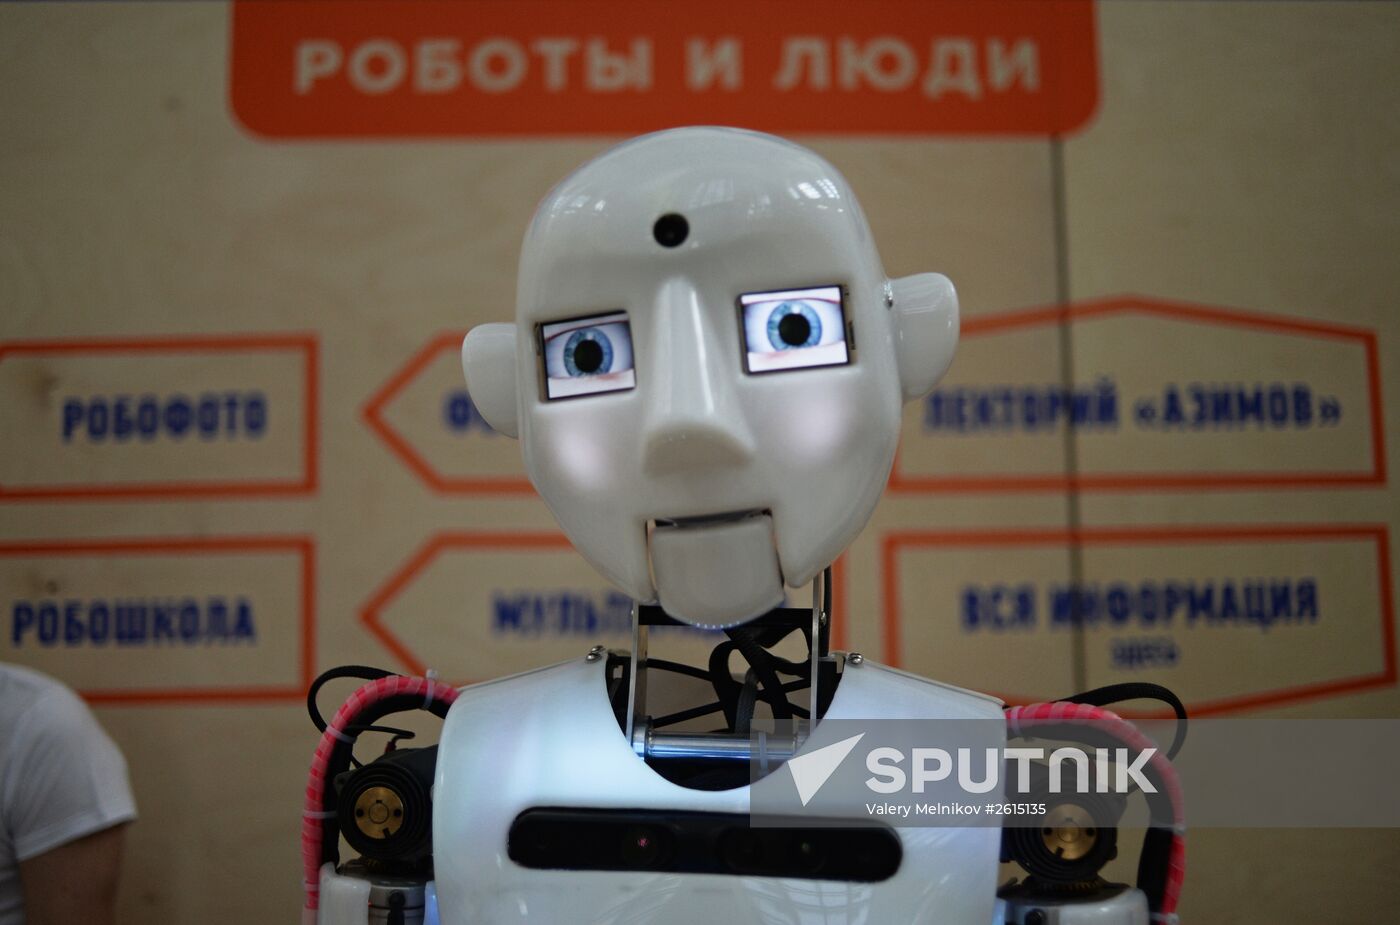 Exhibition "Robostation" at Moscow's VDNKh